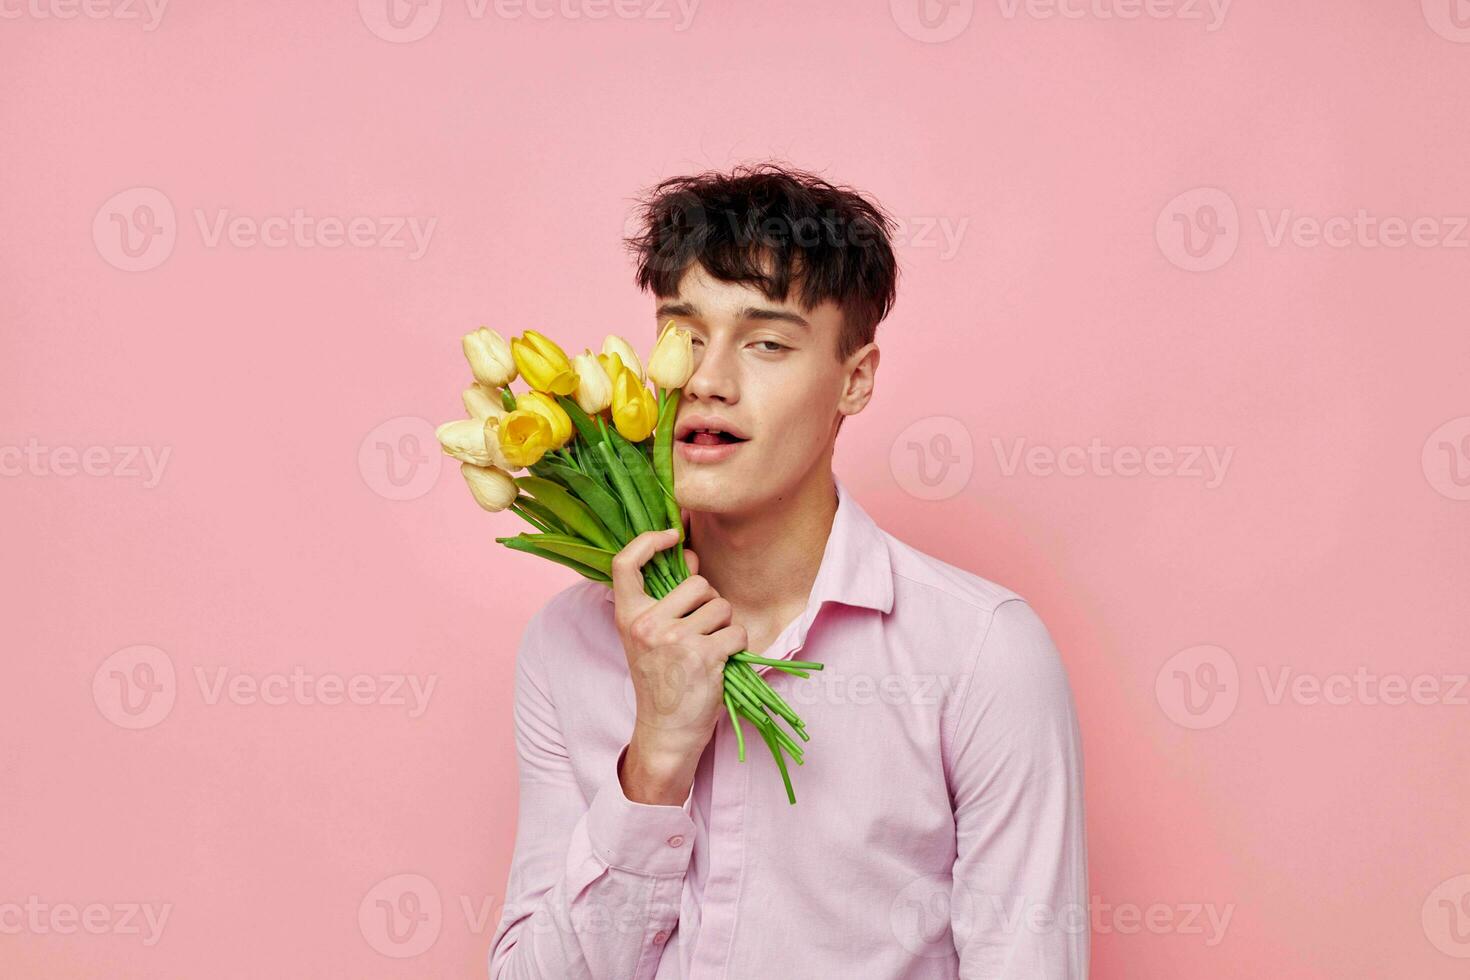 pretty man in a pink shirt with a bouquet of flowers gesturing with his hands model studio photo